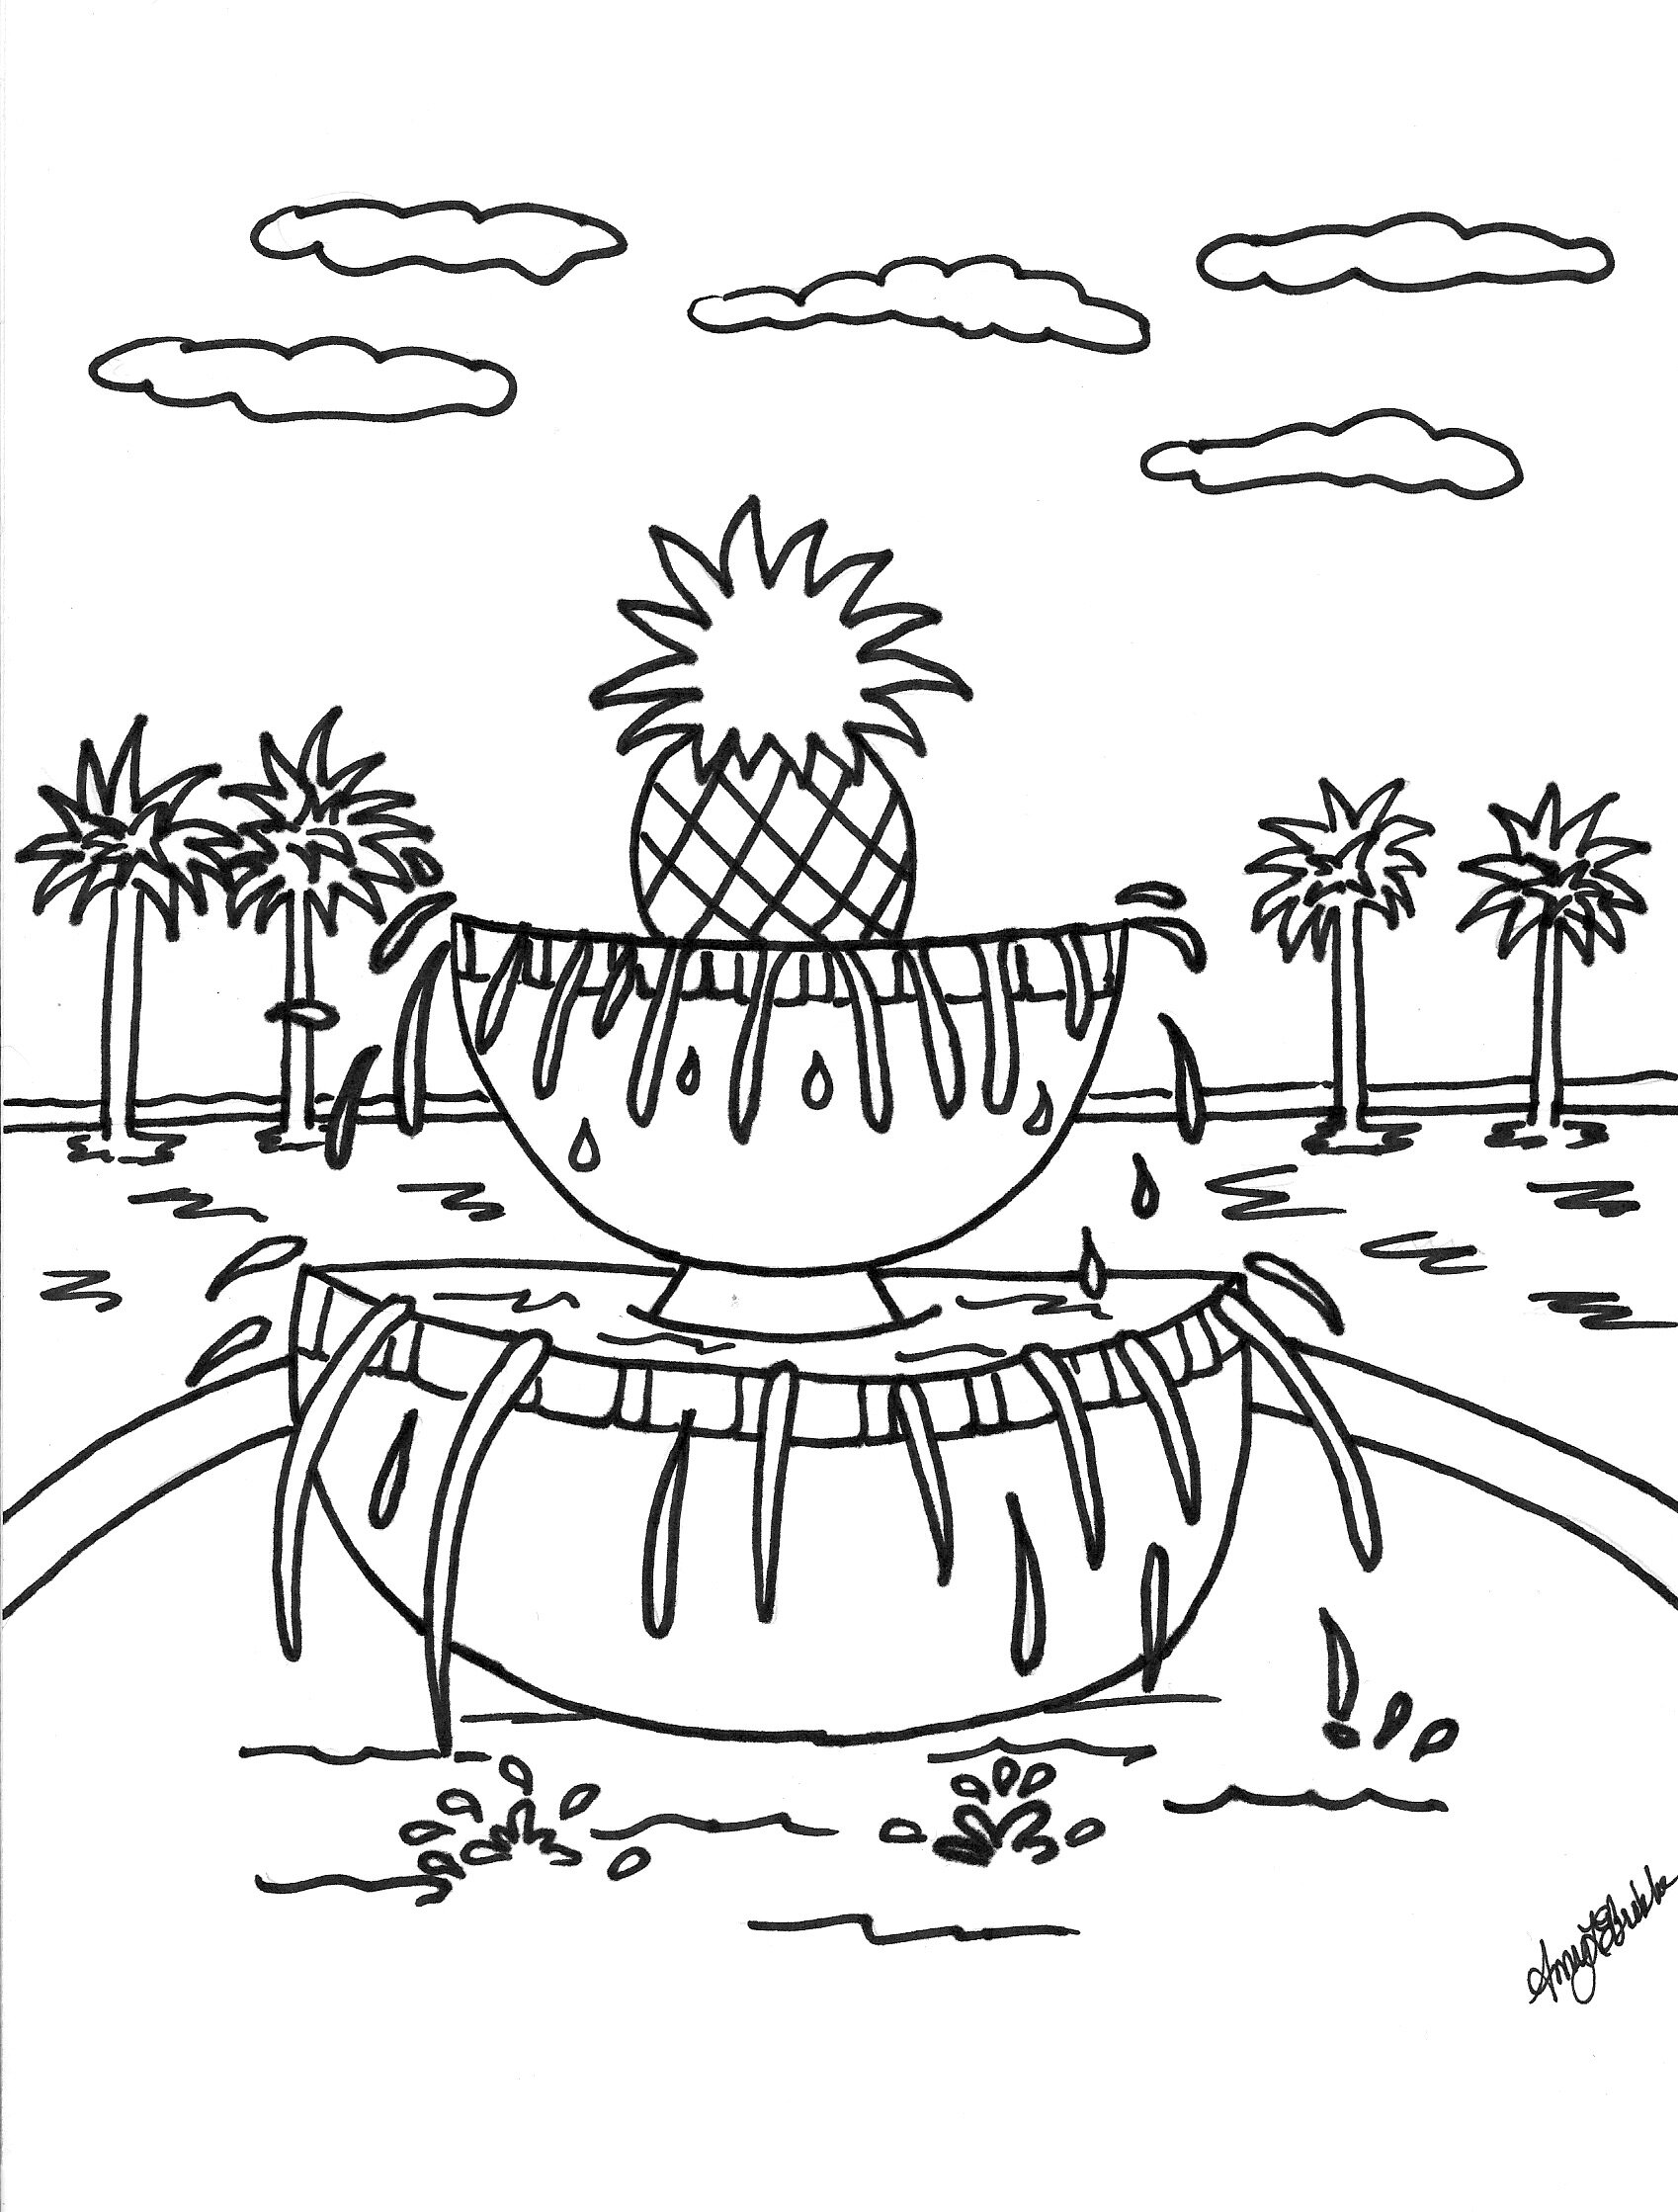 Free coloring pages â for the love of art